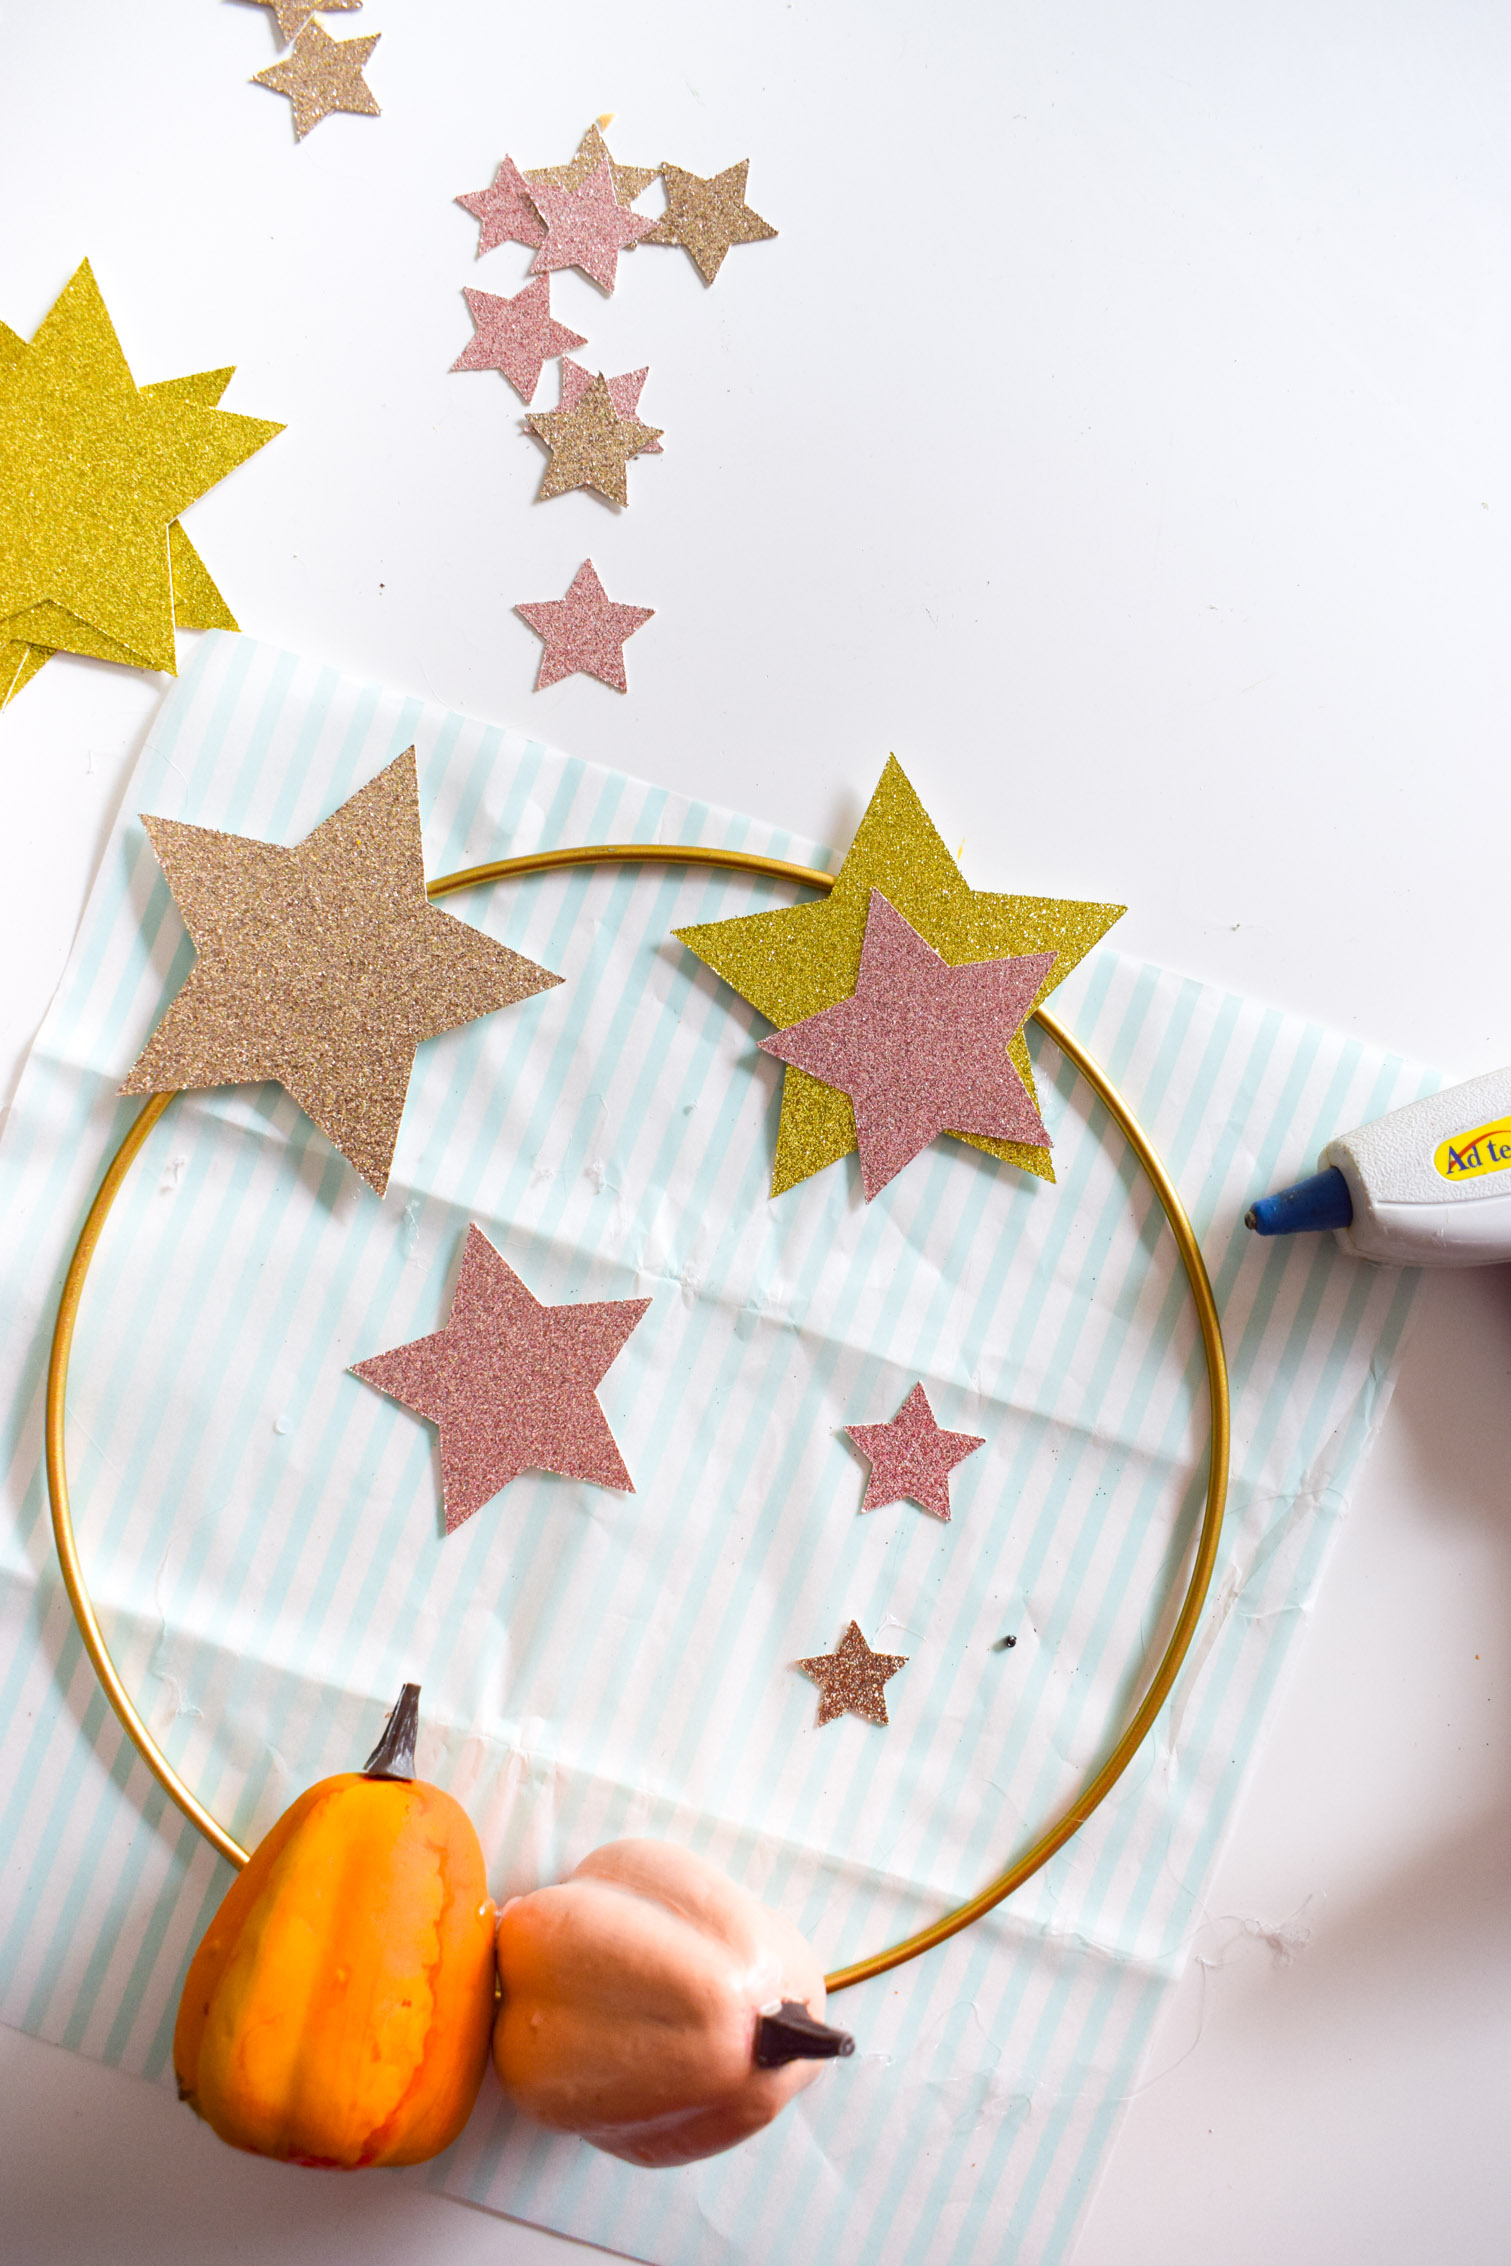 Using glitter cardstock and craft pumpkins, create a star and pumpkin fall wreath. A hoop wreath for your front door, and one for the playhouse too!